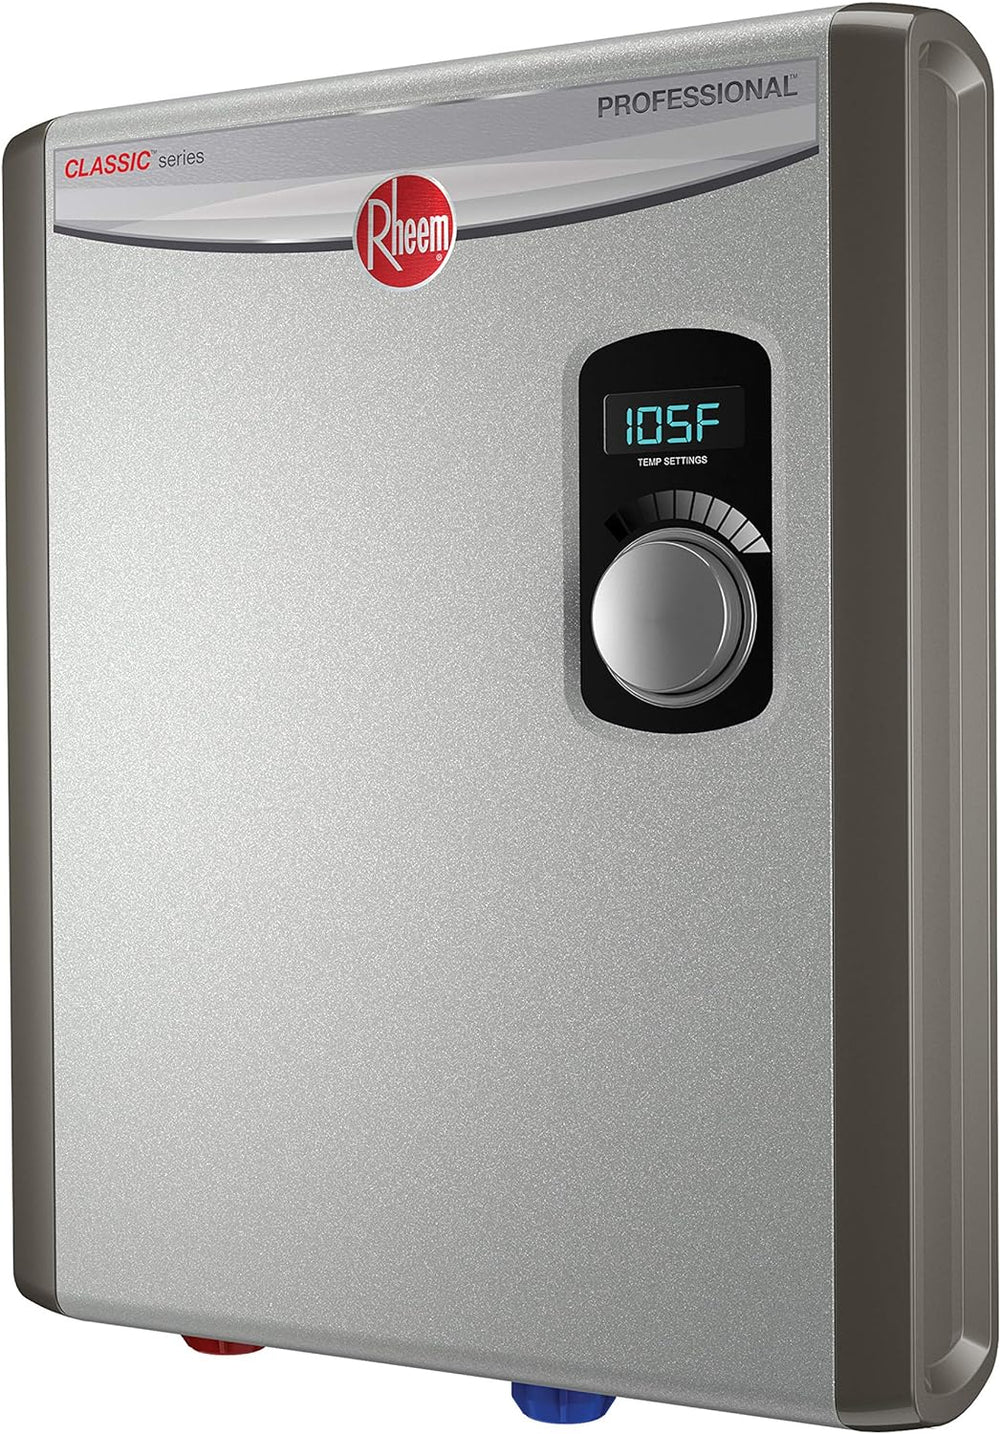 Rheem RTEX-18 Classic 18 kW 4.4 GPM Tankless Electric Water Heater Indoor 240V New